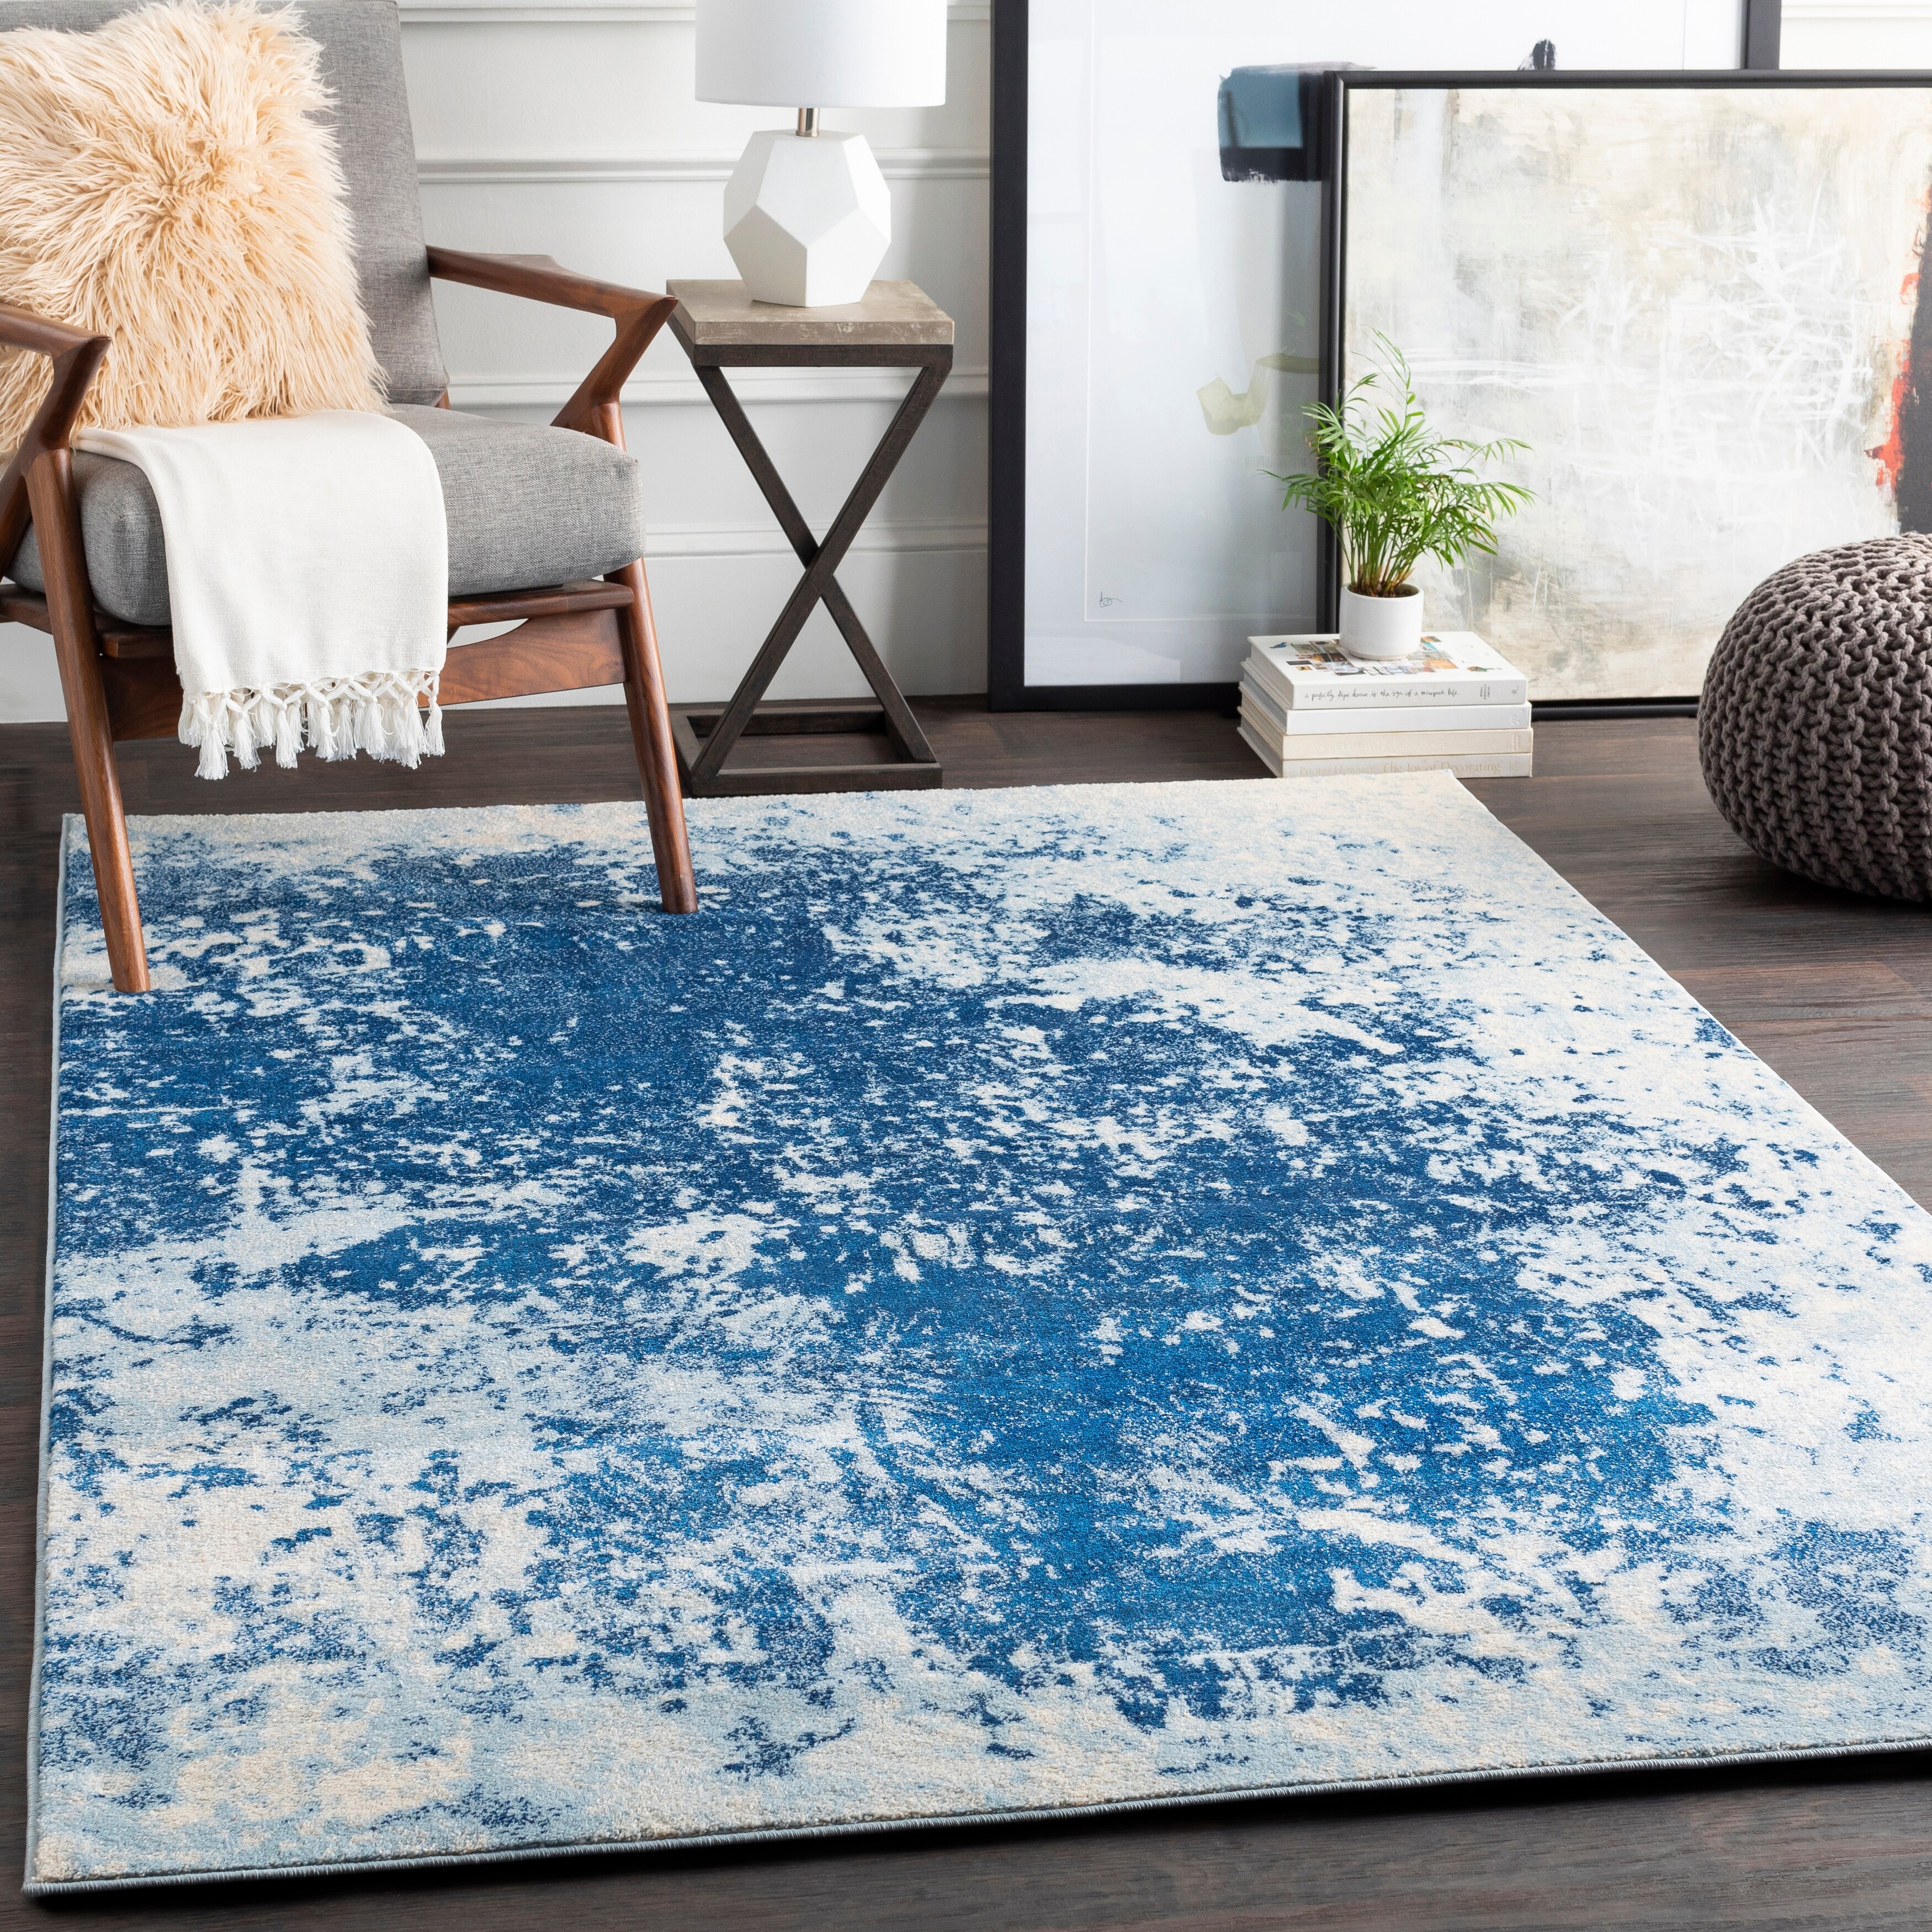 BED OF ROSES BLUE FLAT DESTRESSED Indoor Floor Mat By Kavka